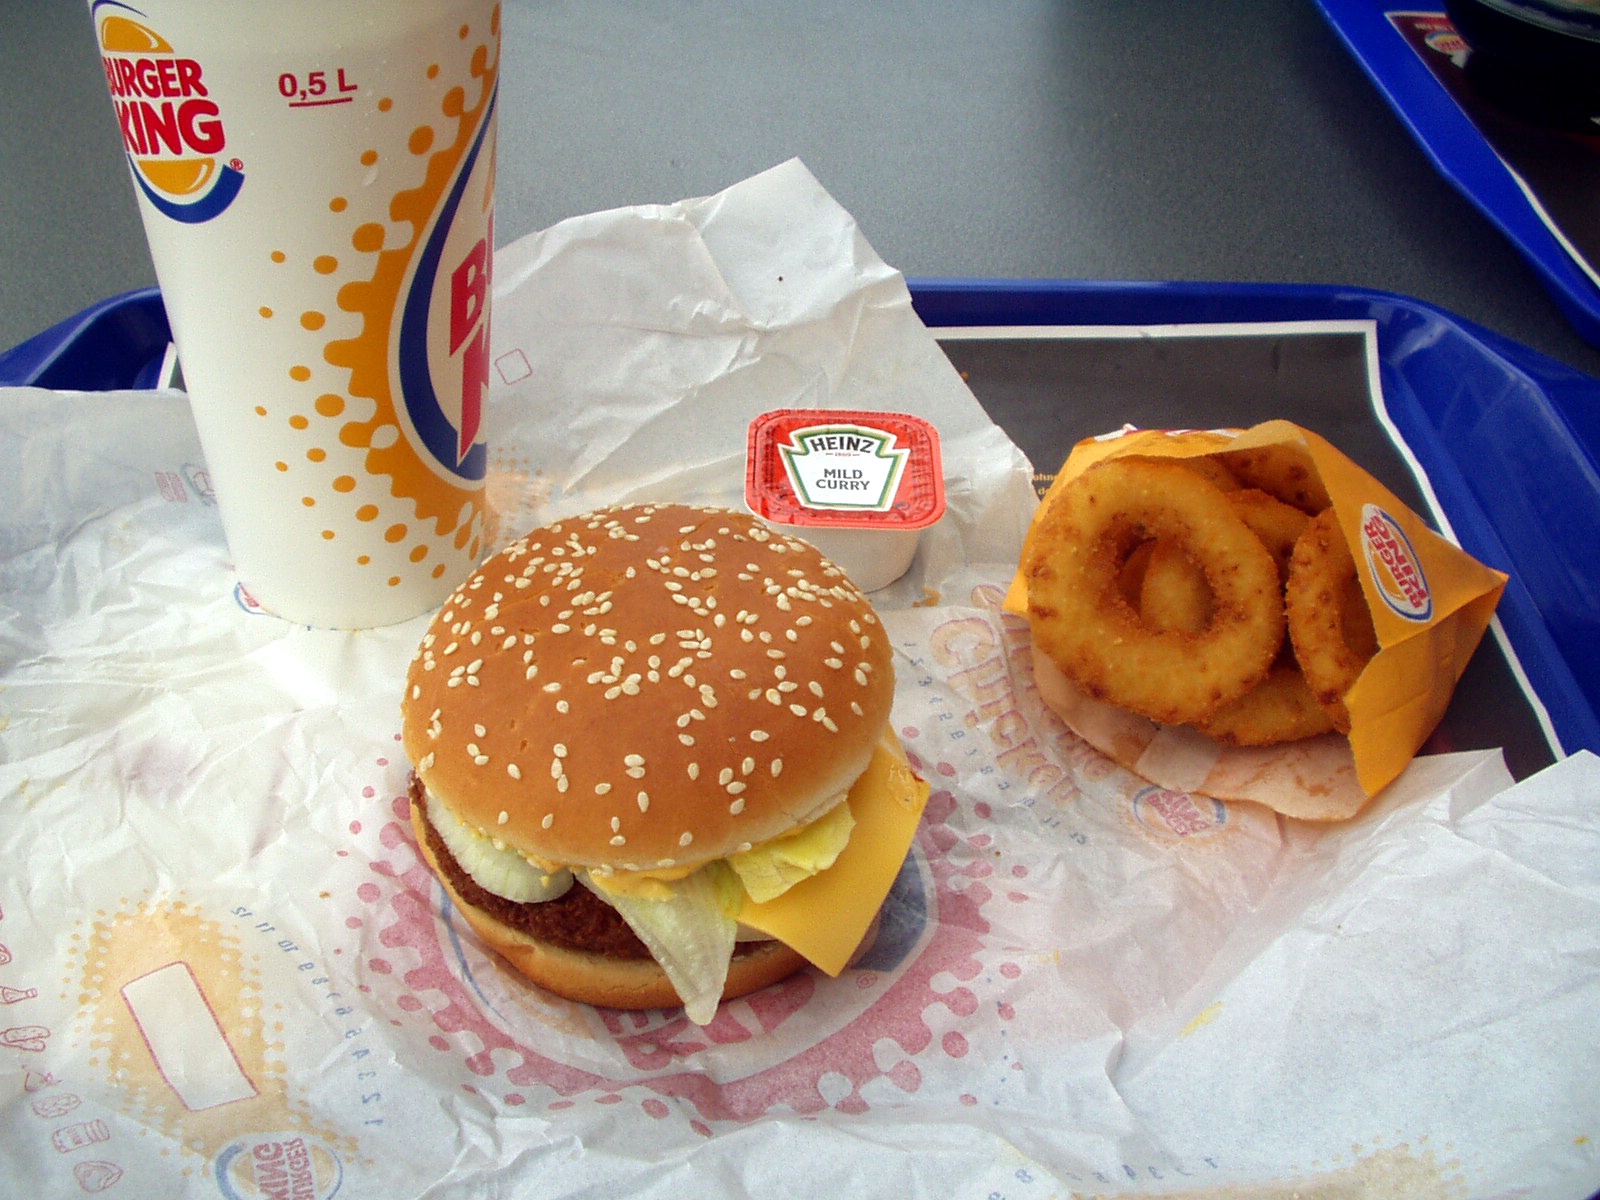 a tray holding an odd burger with onion rings, coffee and a doughnut